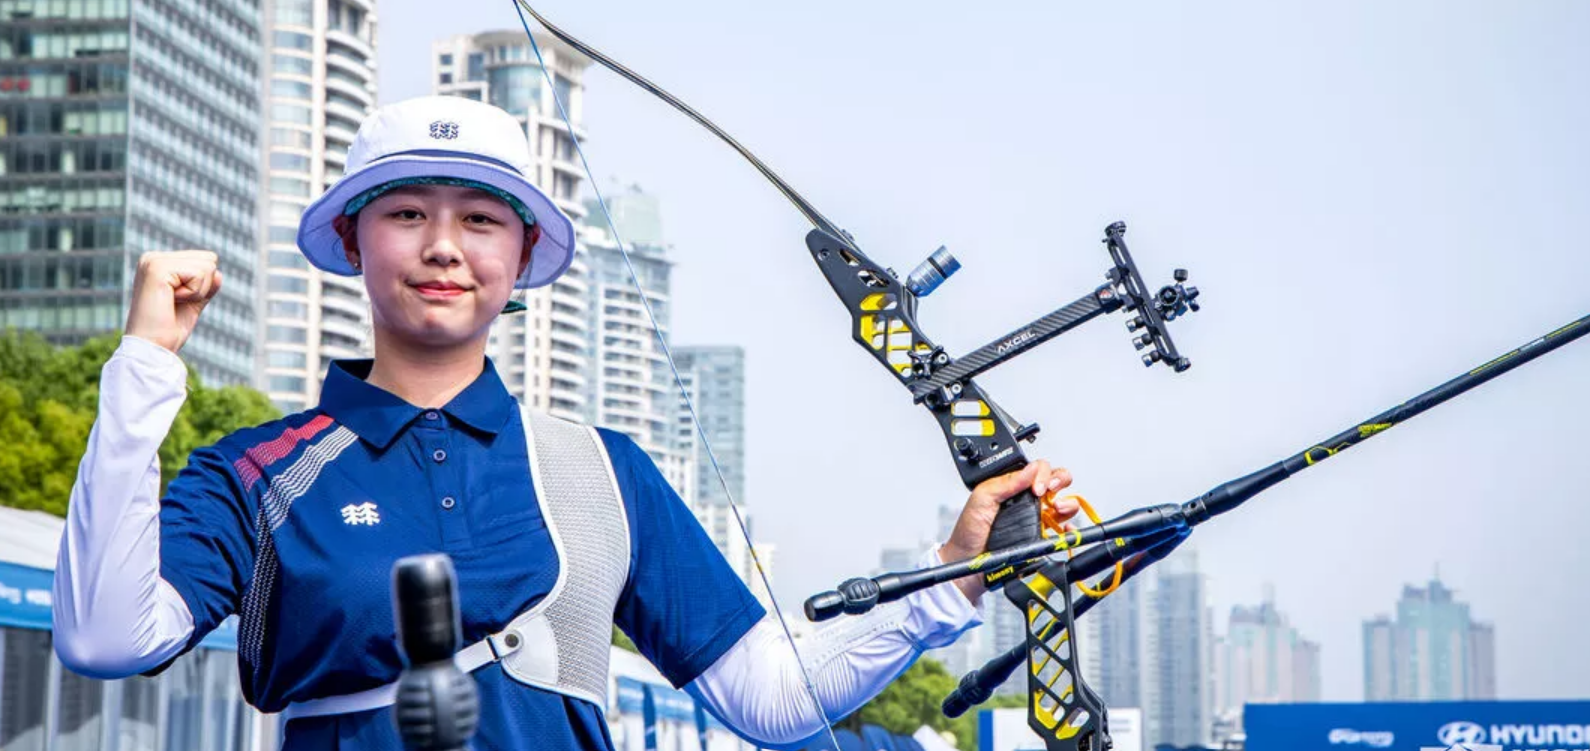 New faces emerge as South Korea dominate on Archery World Cup return